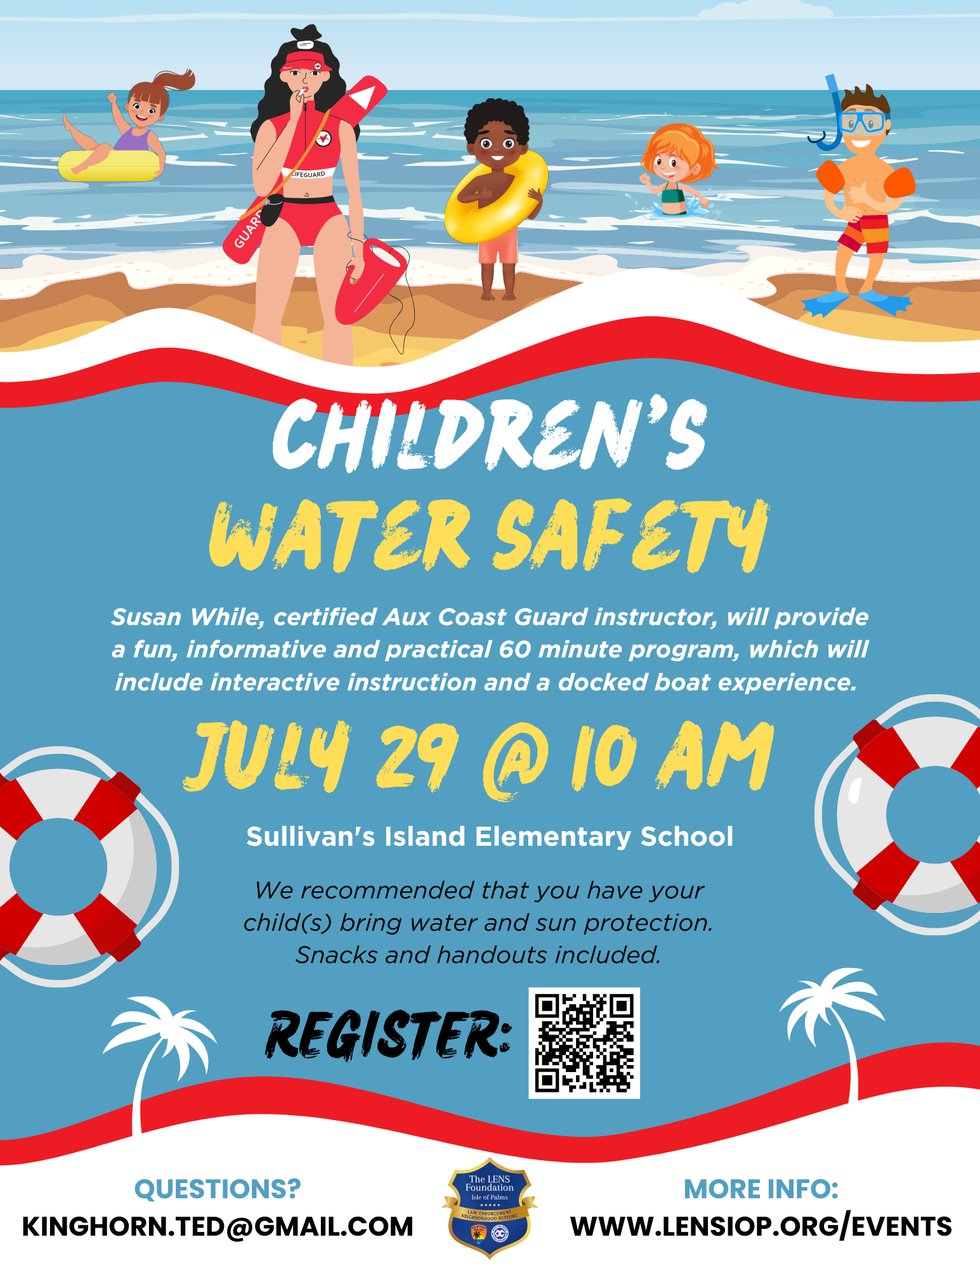 LENS Children's water safety program - July 29 flyer with QR code